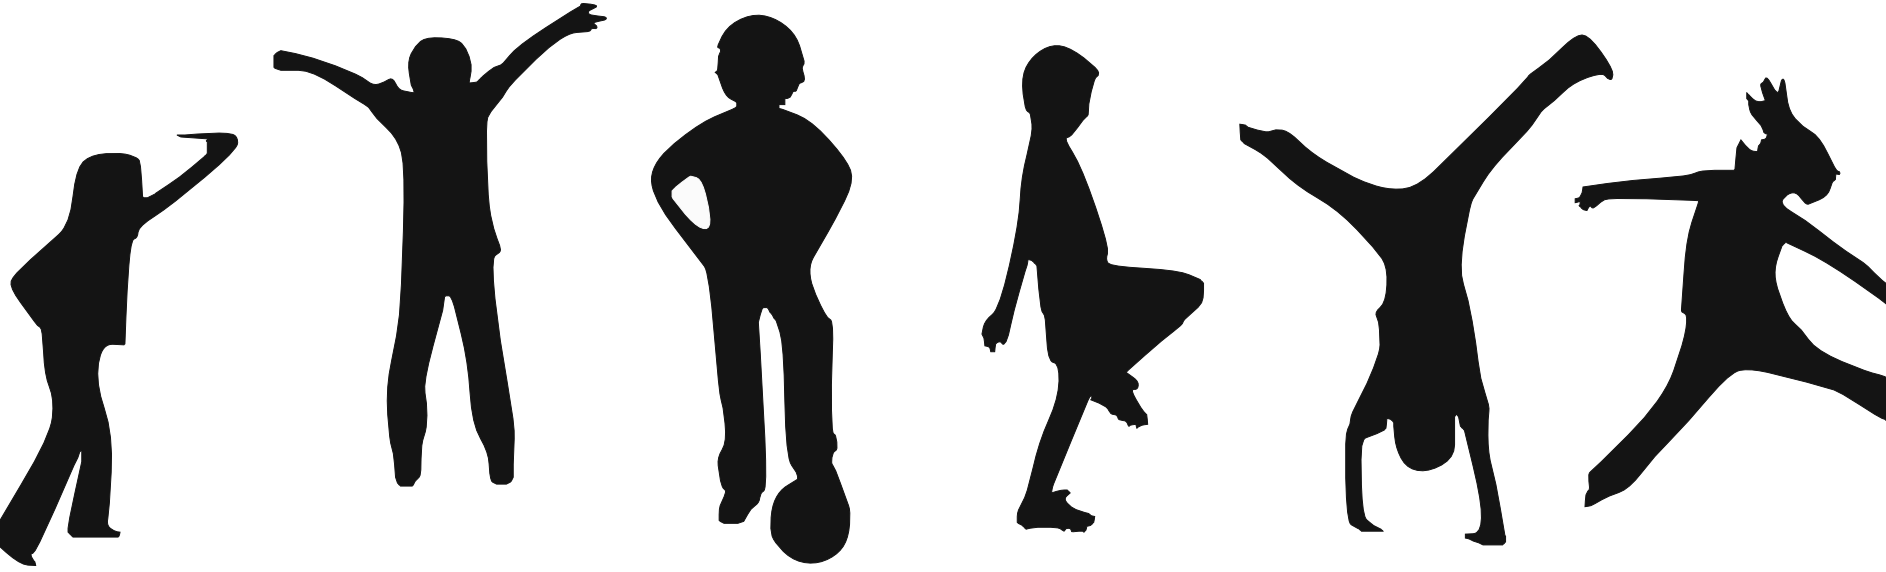 silhouettes of sporty young people  